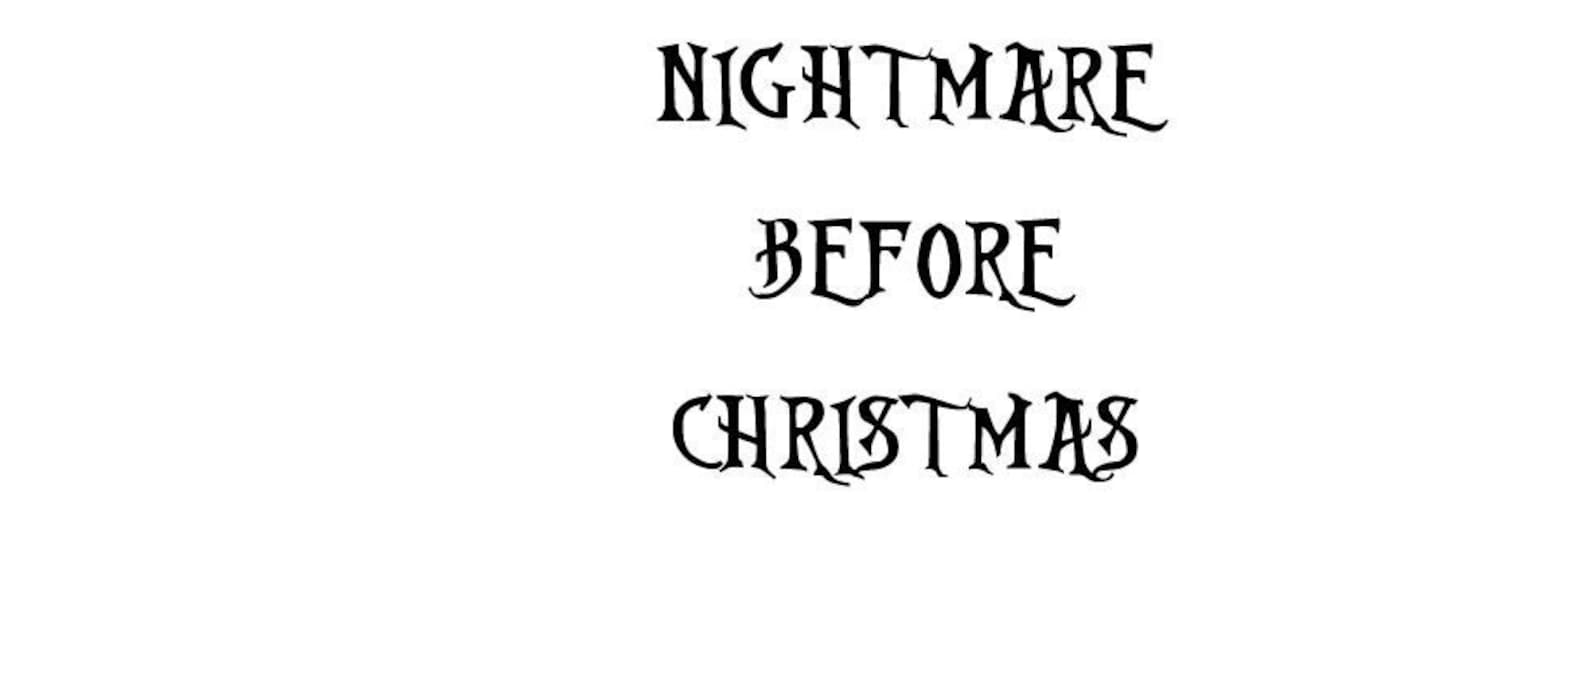 Nightmare Before Christmas font digital download | Etsy